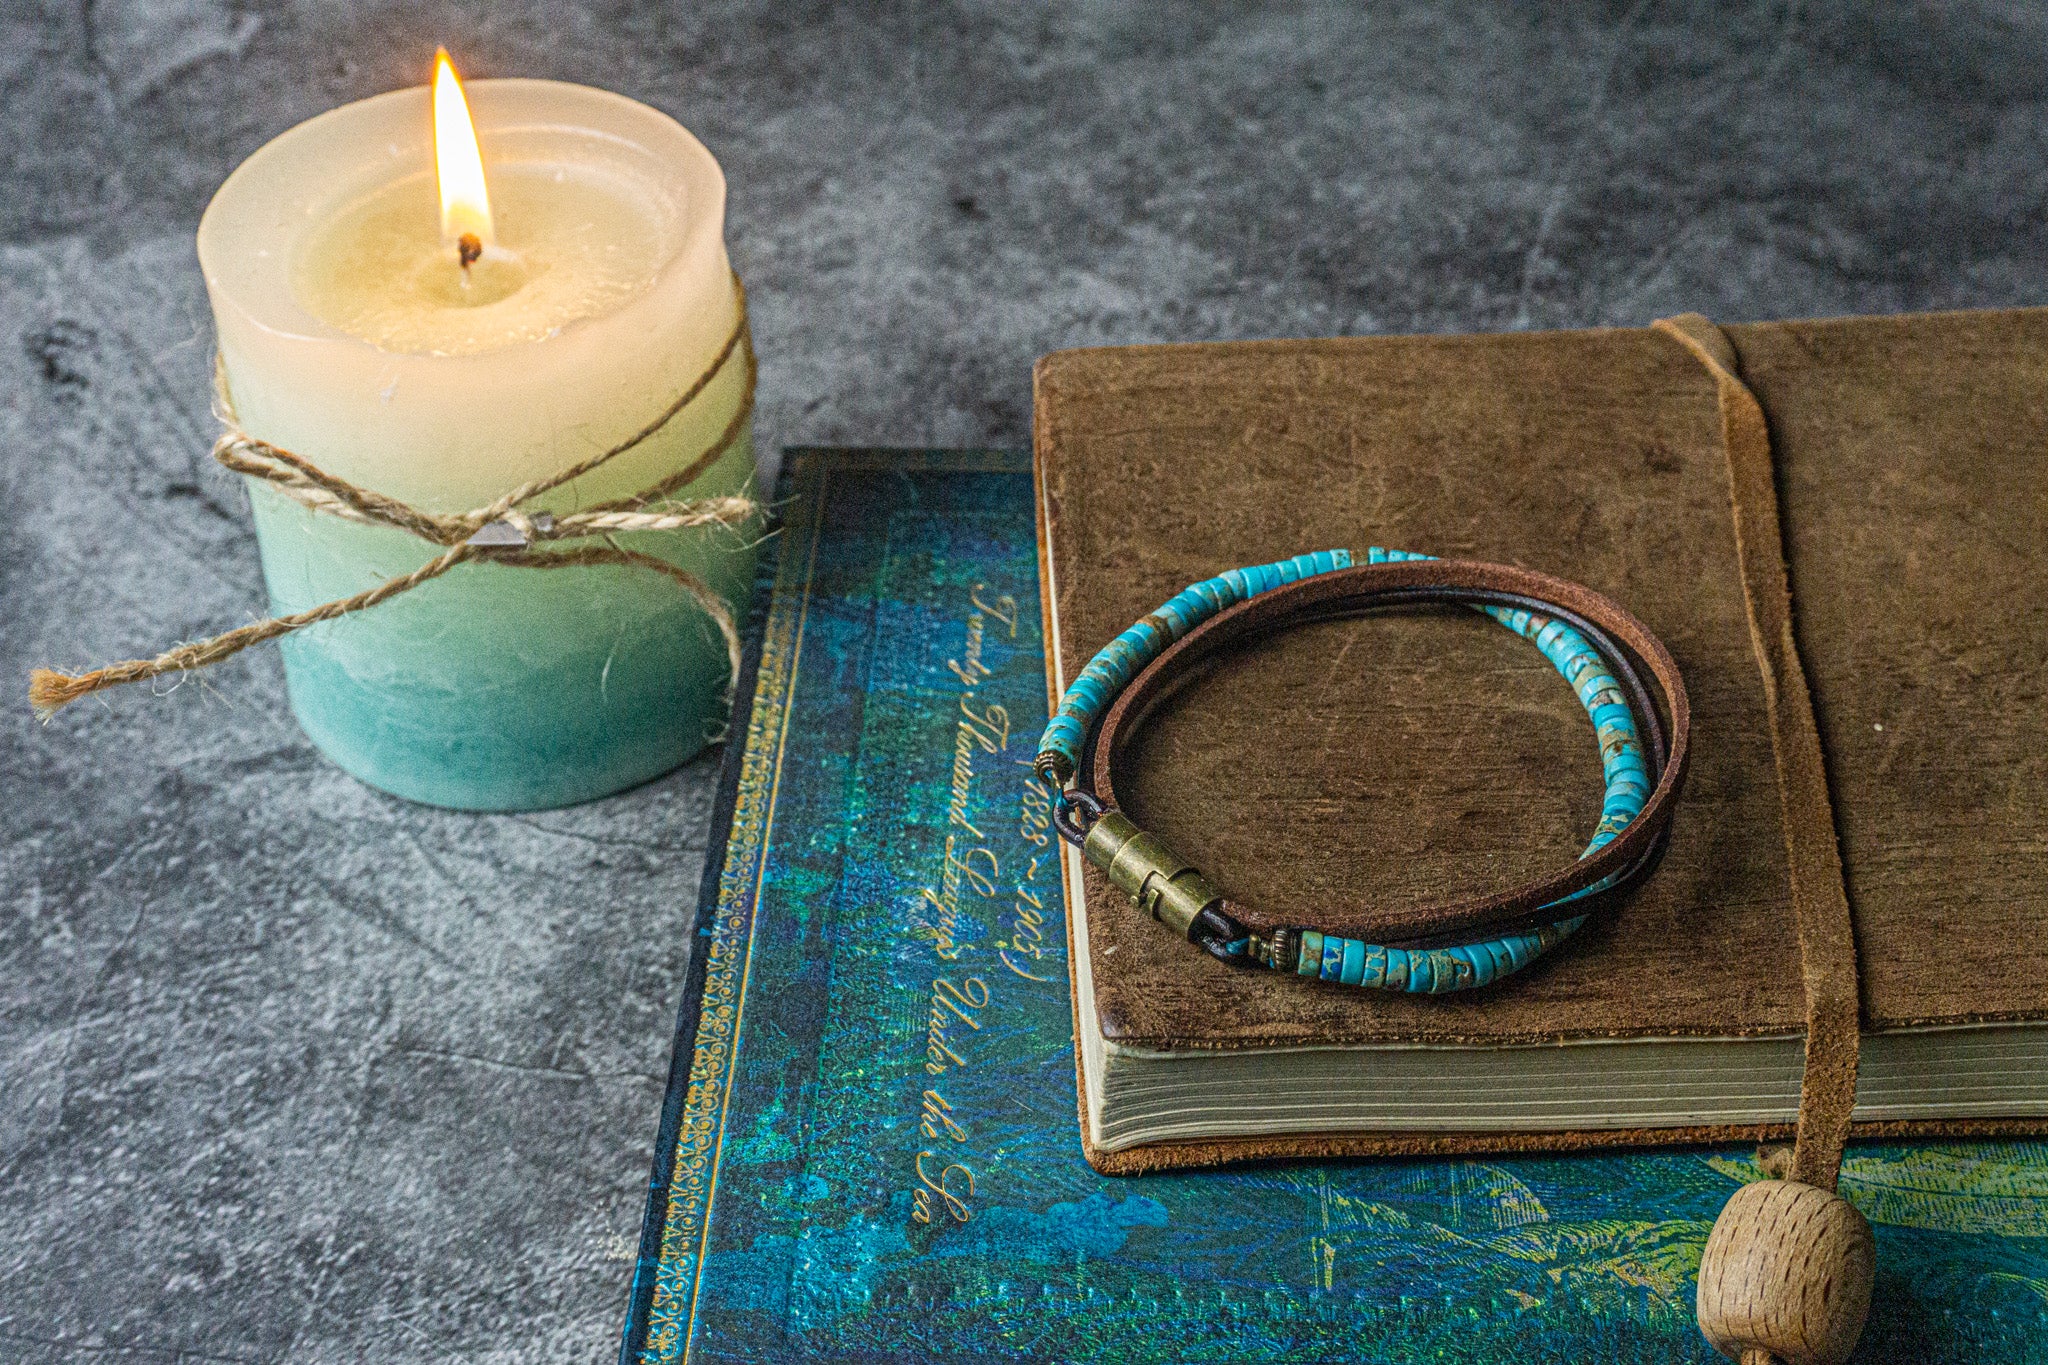 layered bracelet made of turquoise jasper and leather